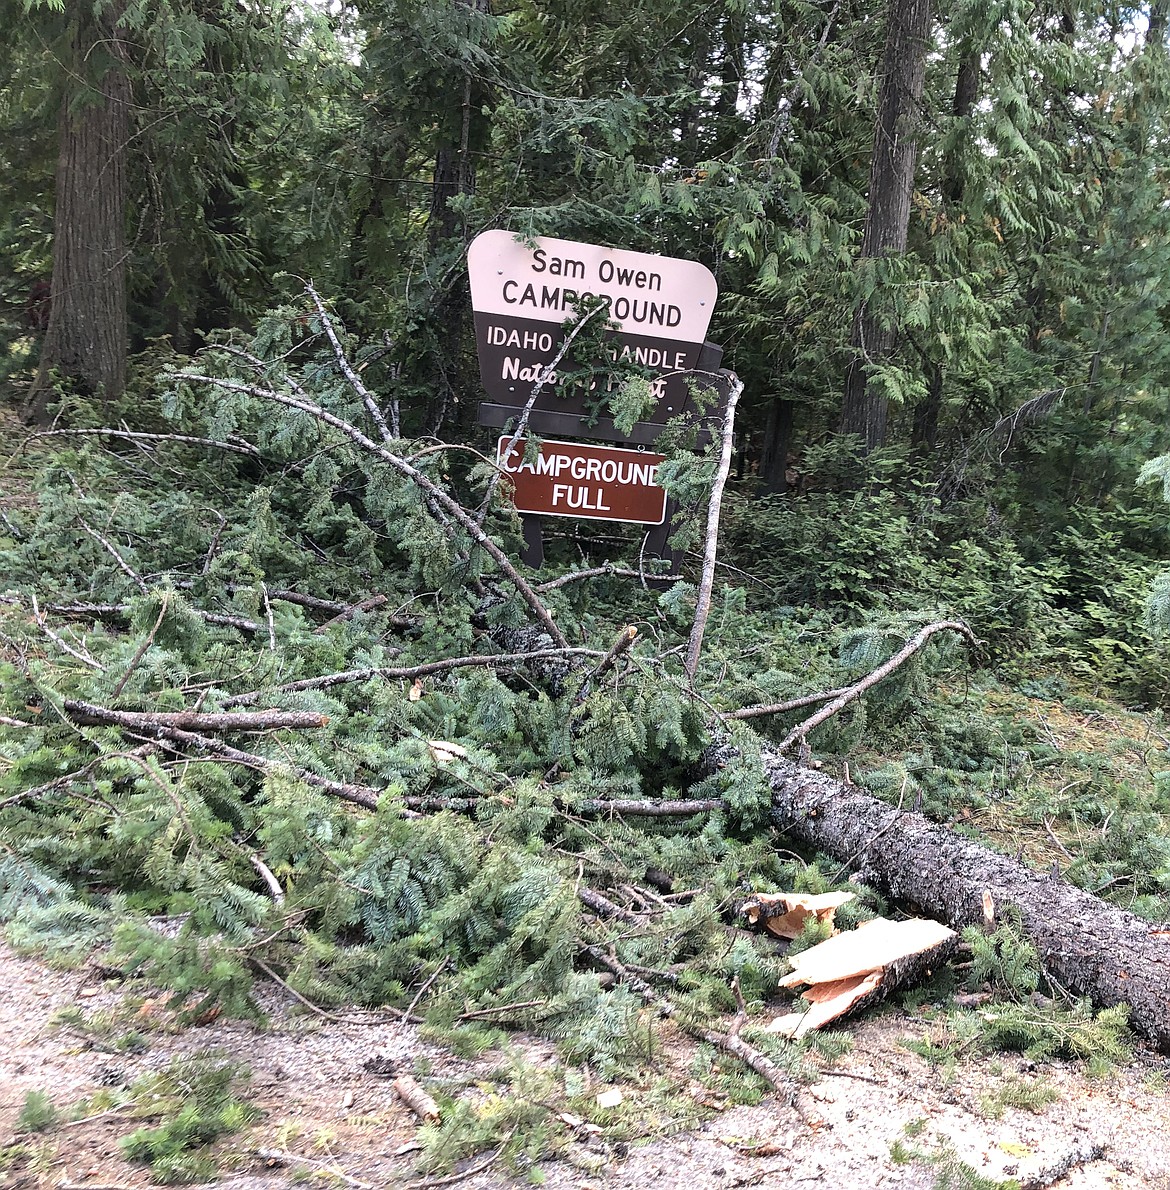 The entrance to Sam Owen Campground after the windstorm.